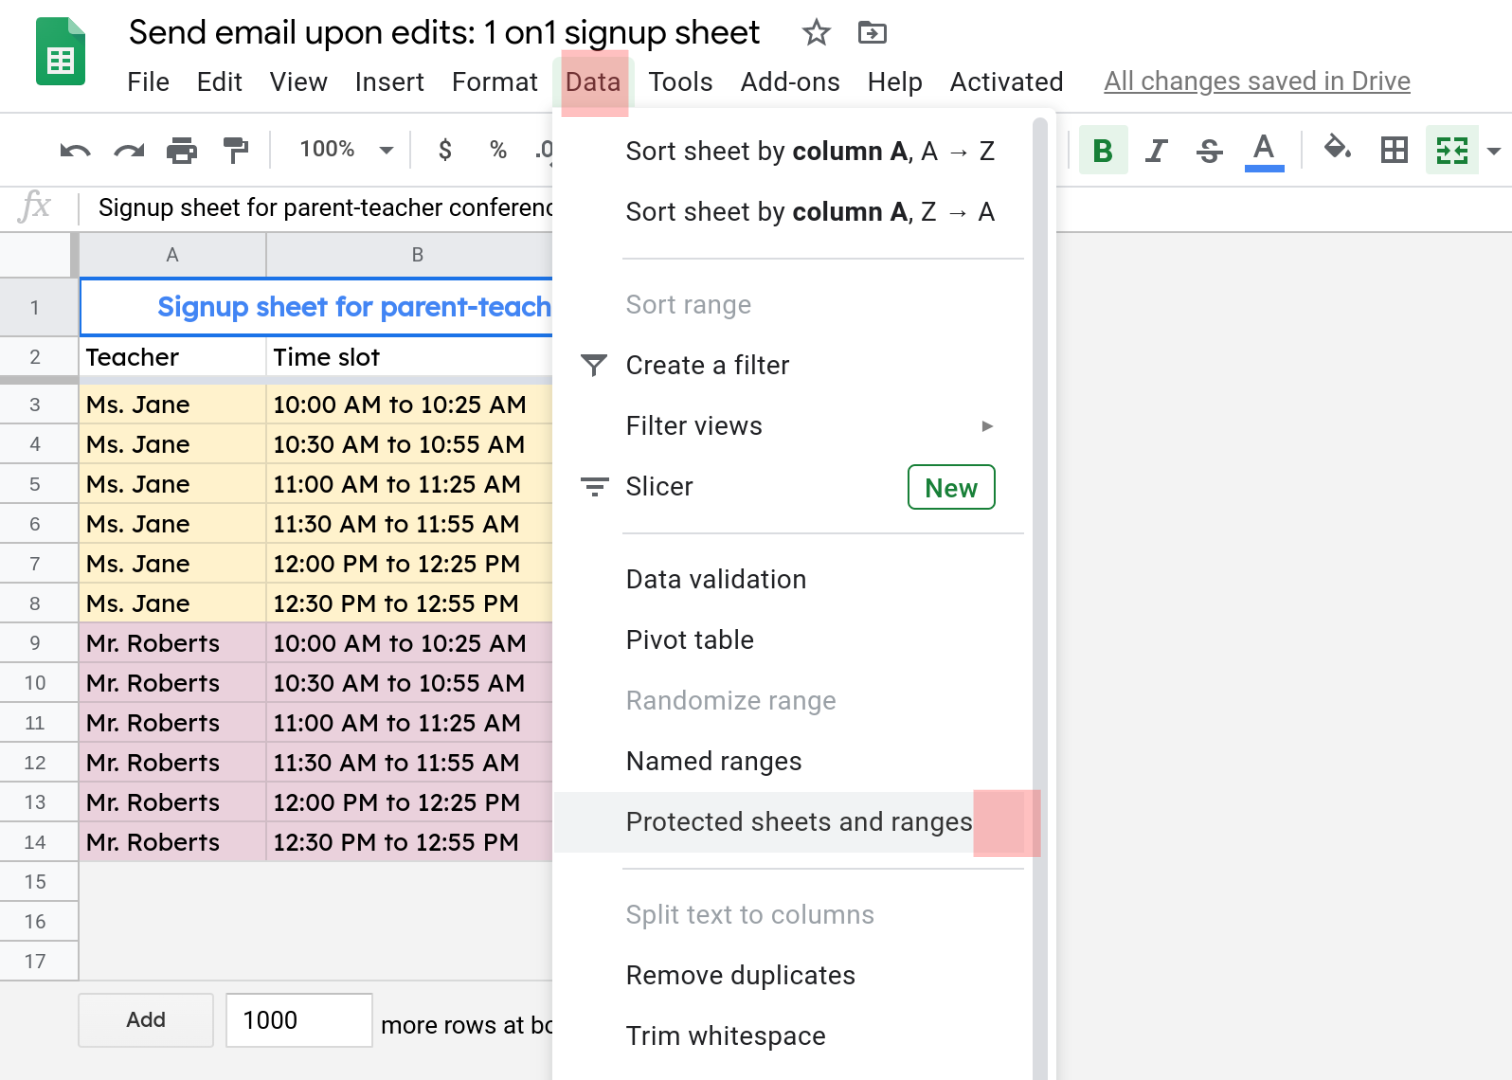 Screenshot of the spreadsheet with the Data menu selected. The menu item "Protected sheets and ranges" is highlighted. 